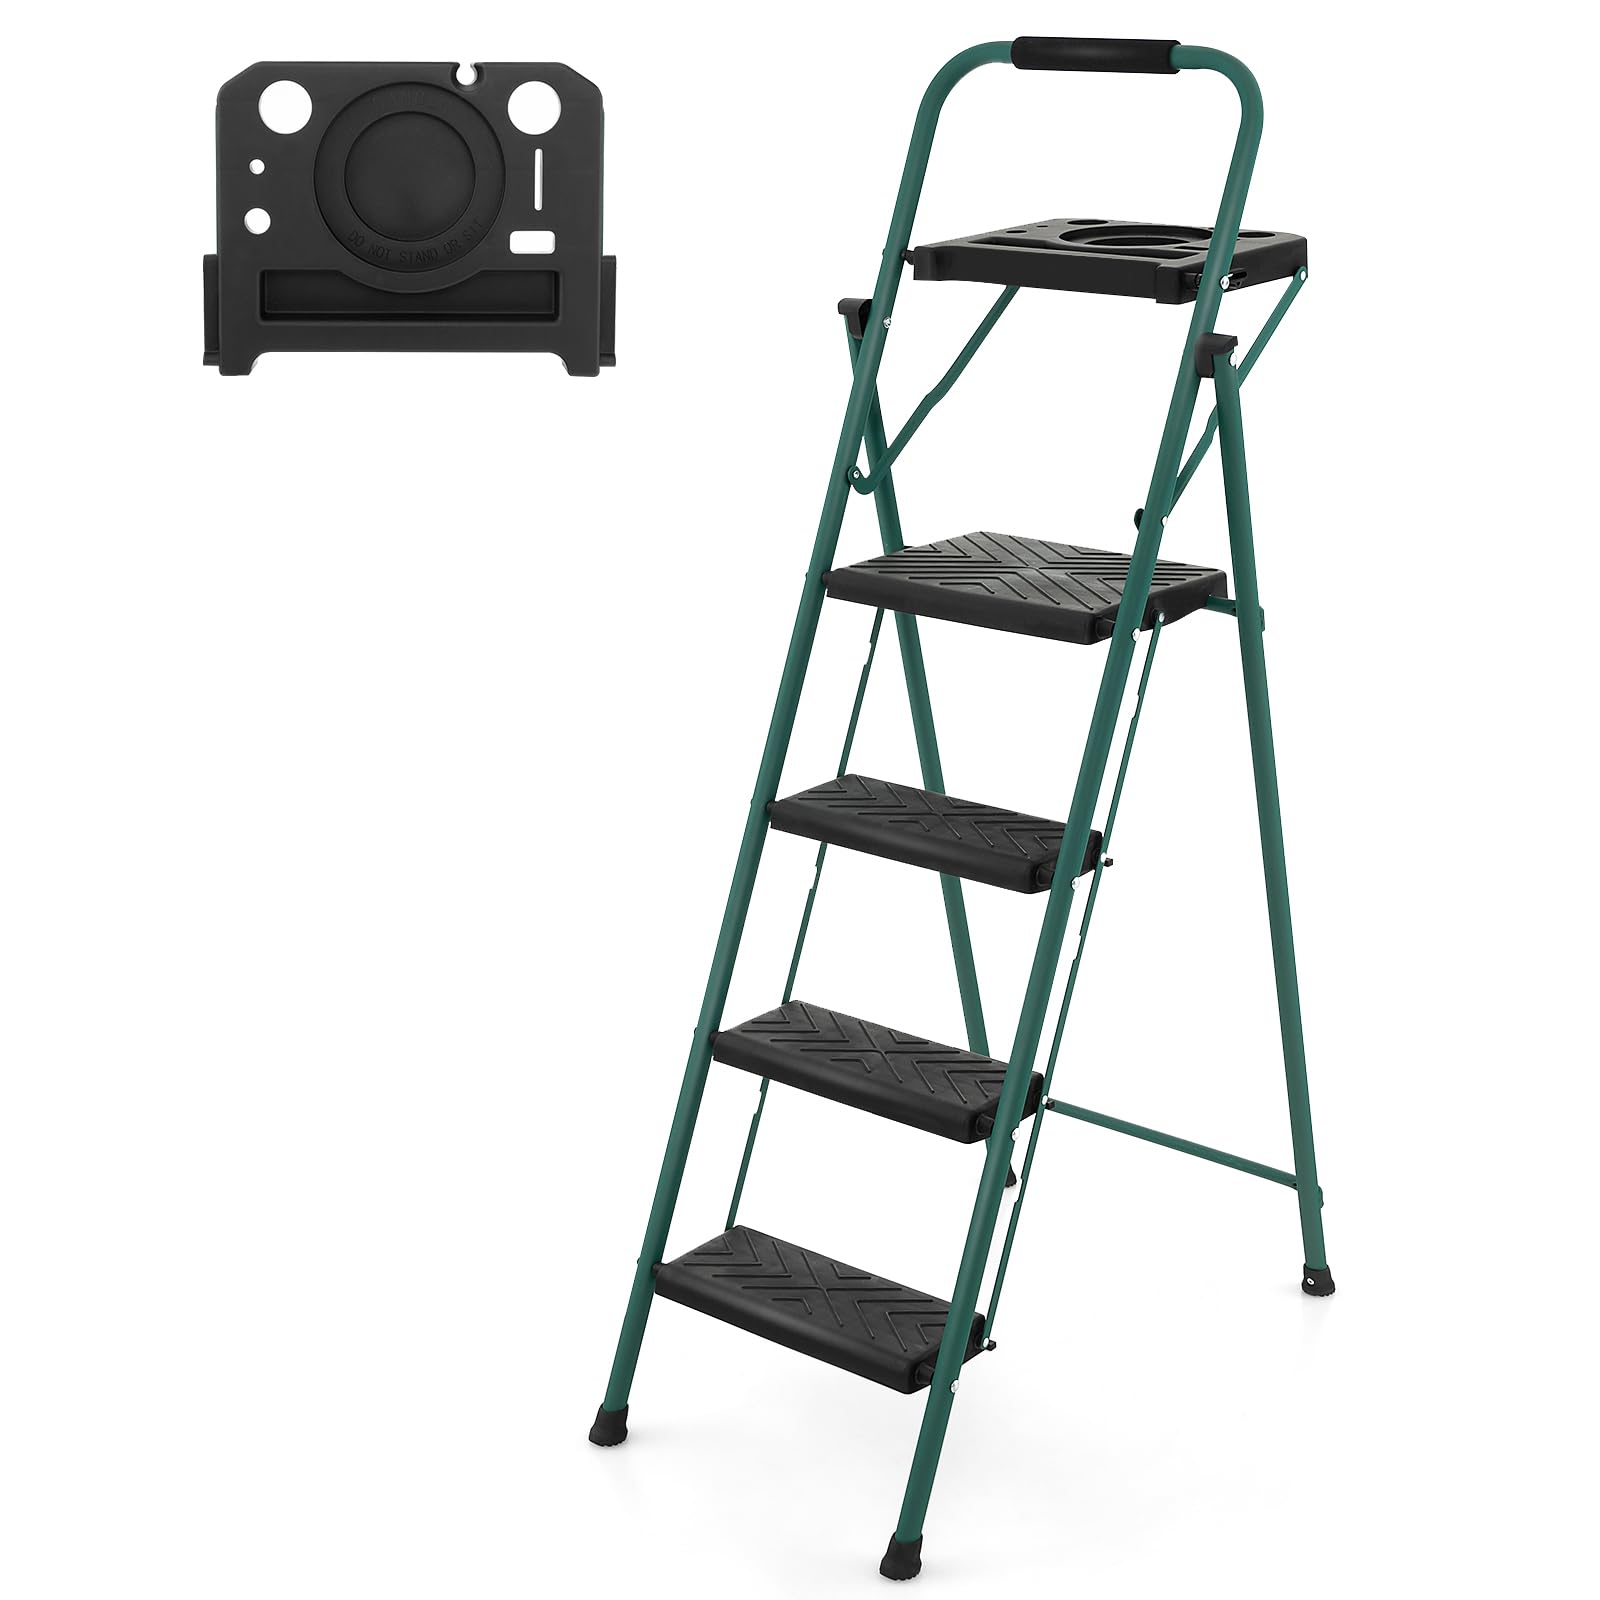 Giantex 4 Step Ladder with Utility Tray, Folding Step Stool with Anti-Slip Footpads